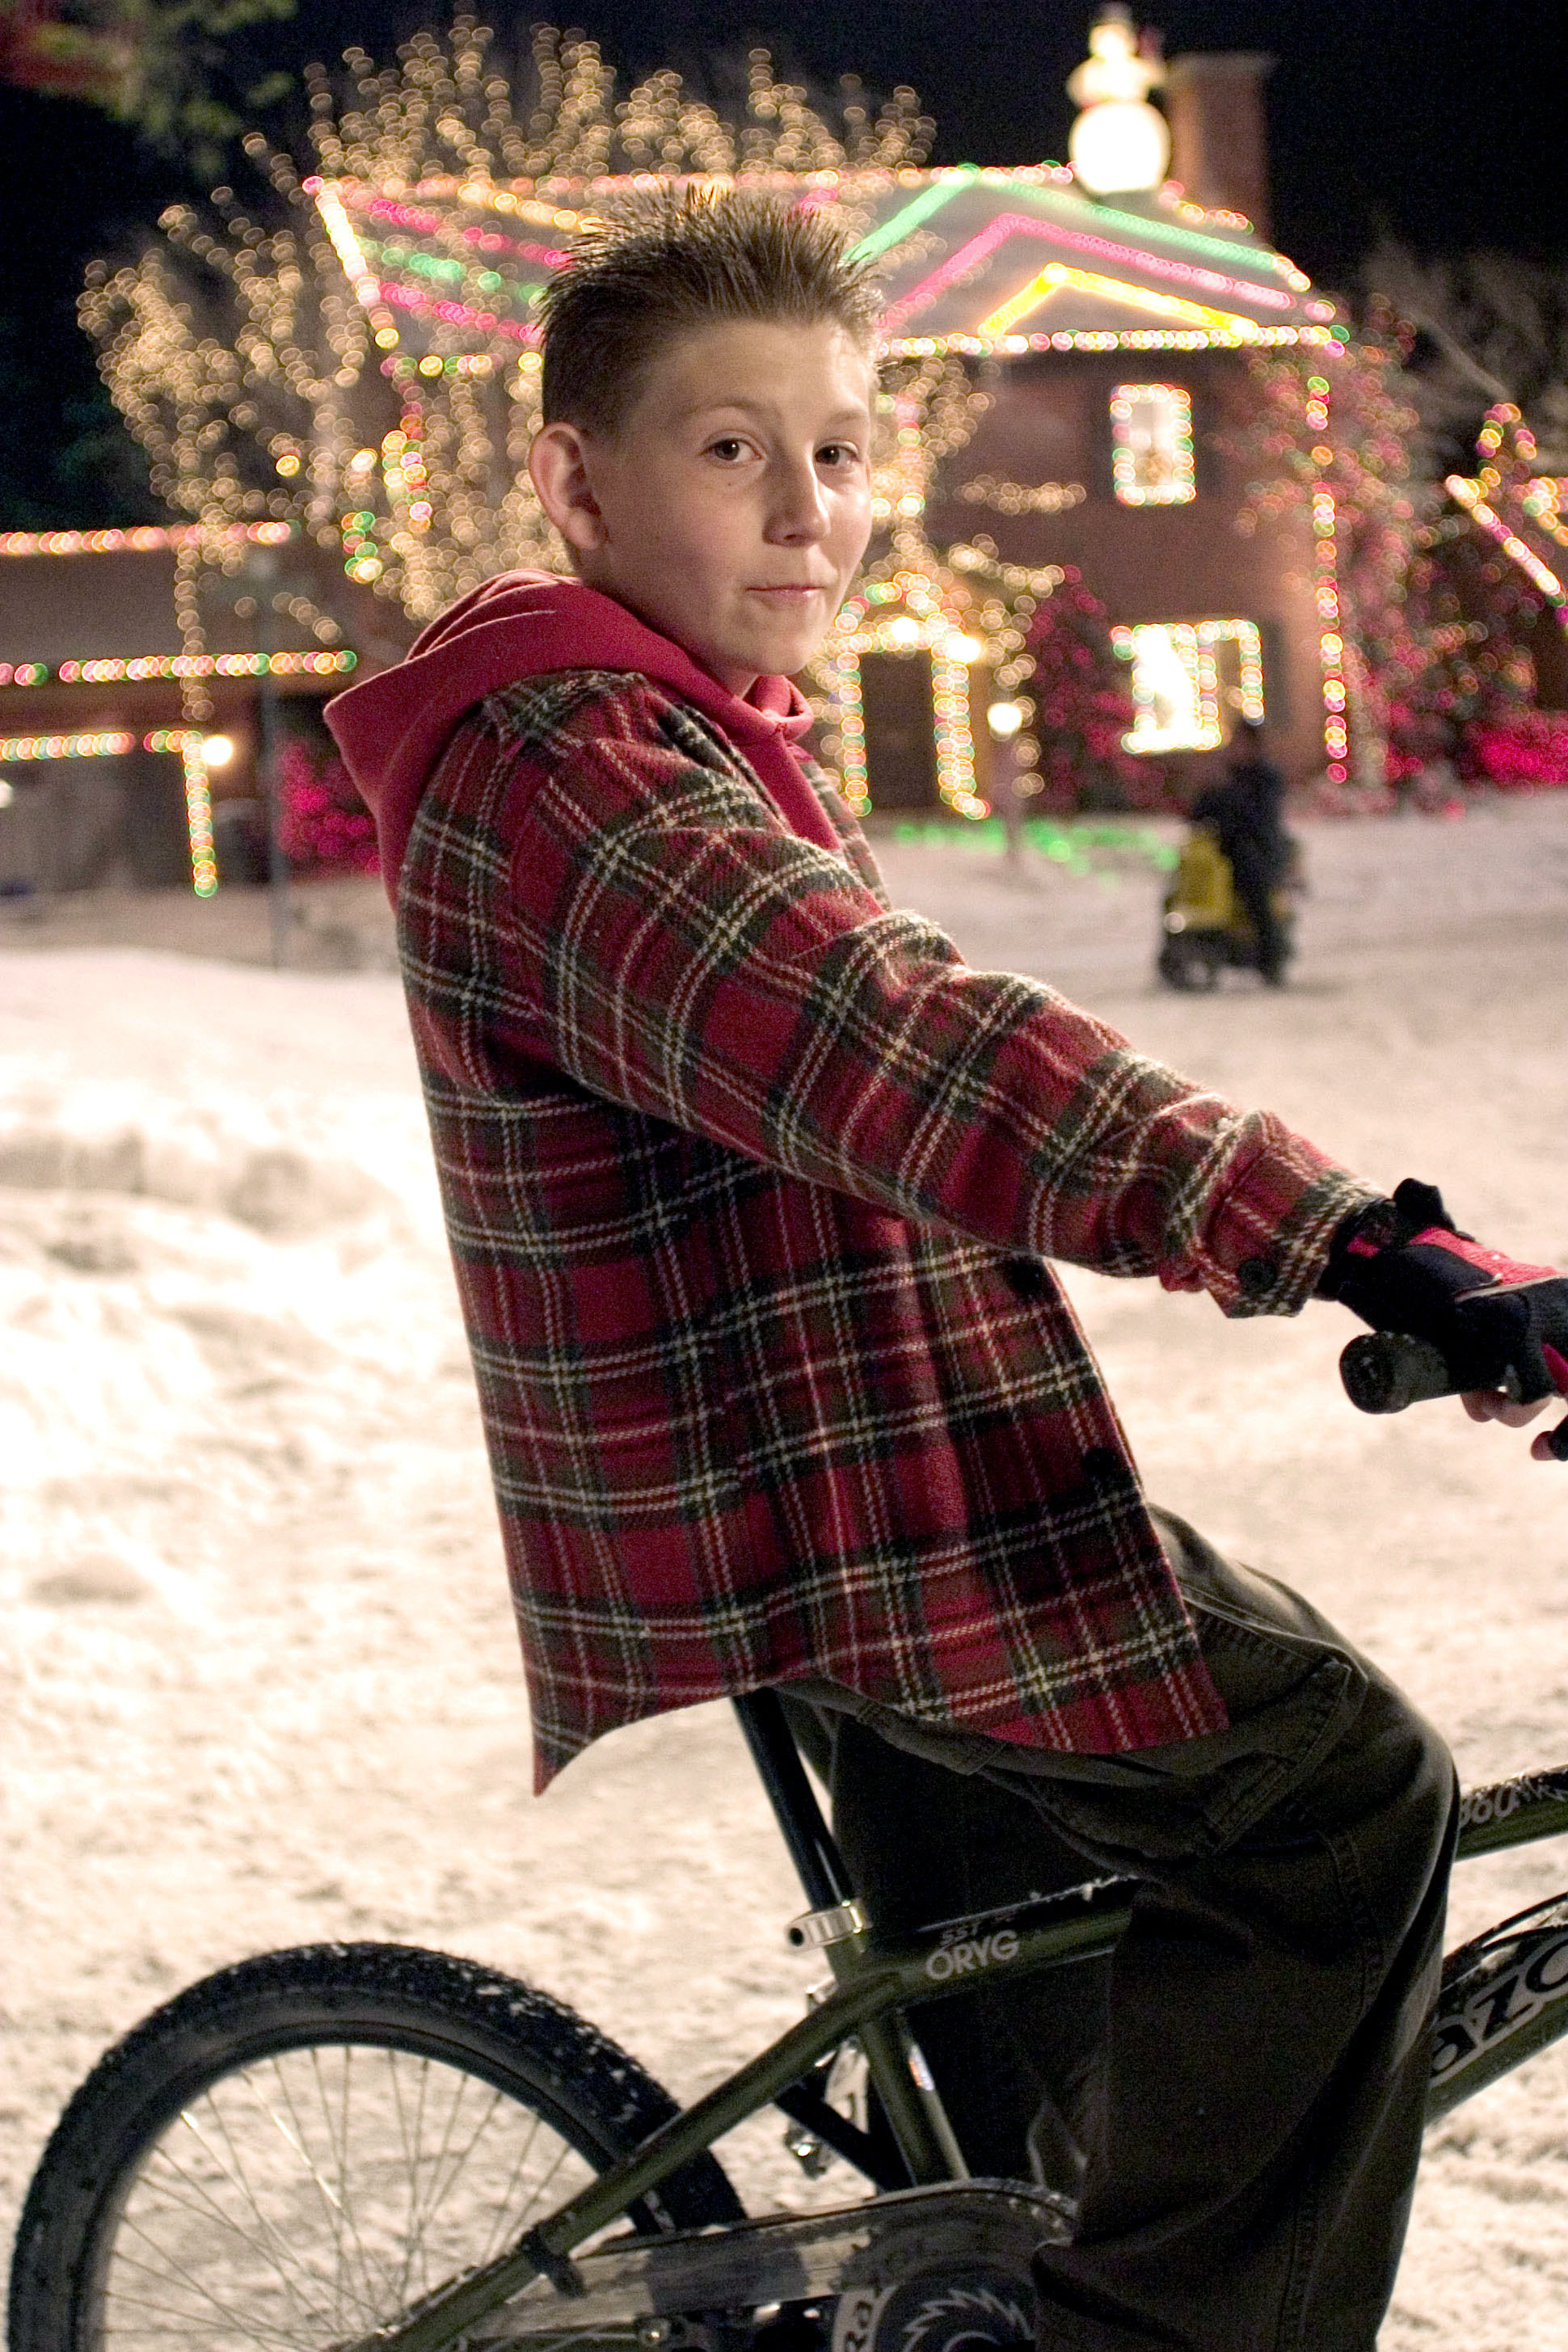 erik is on a bike with spiky hair in the snow